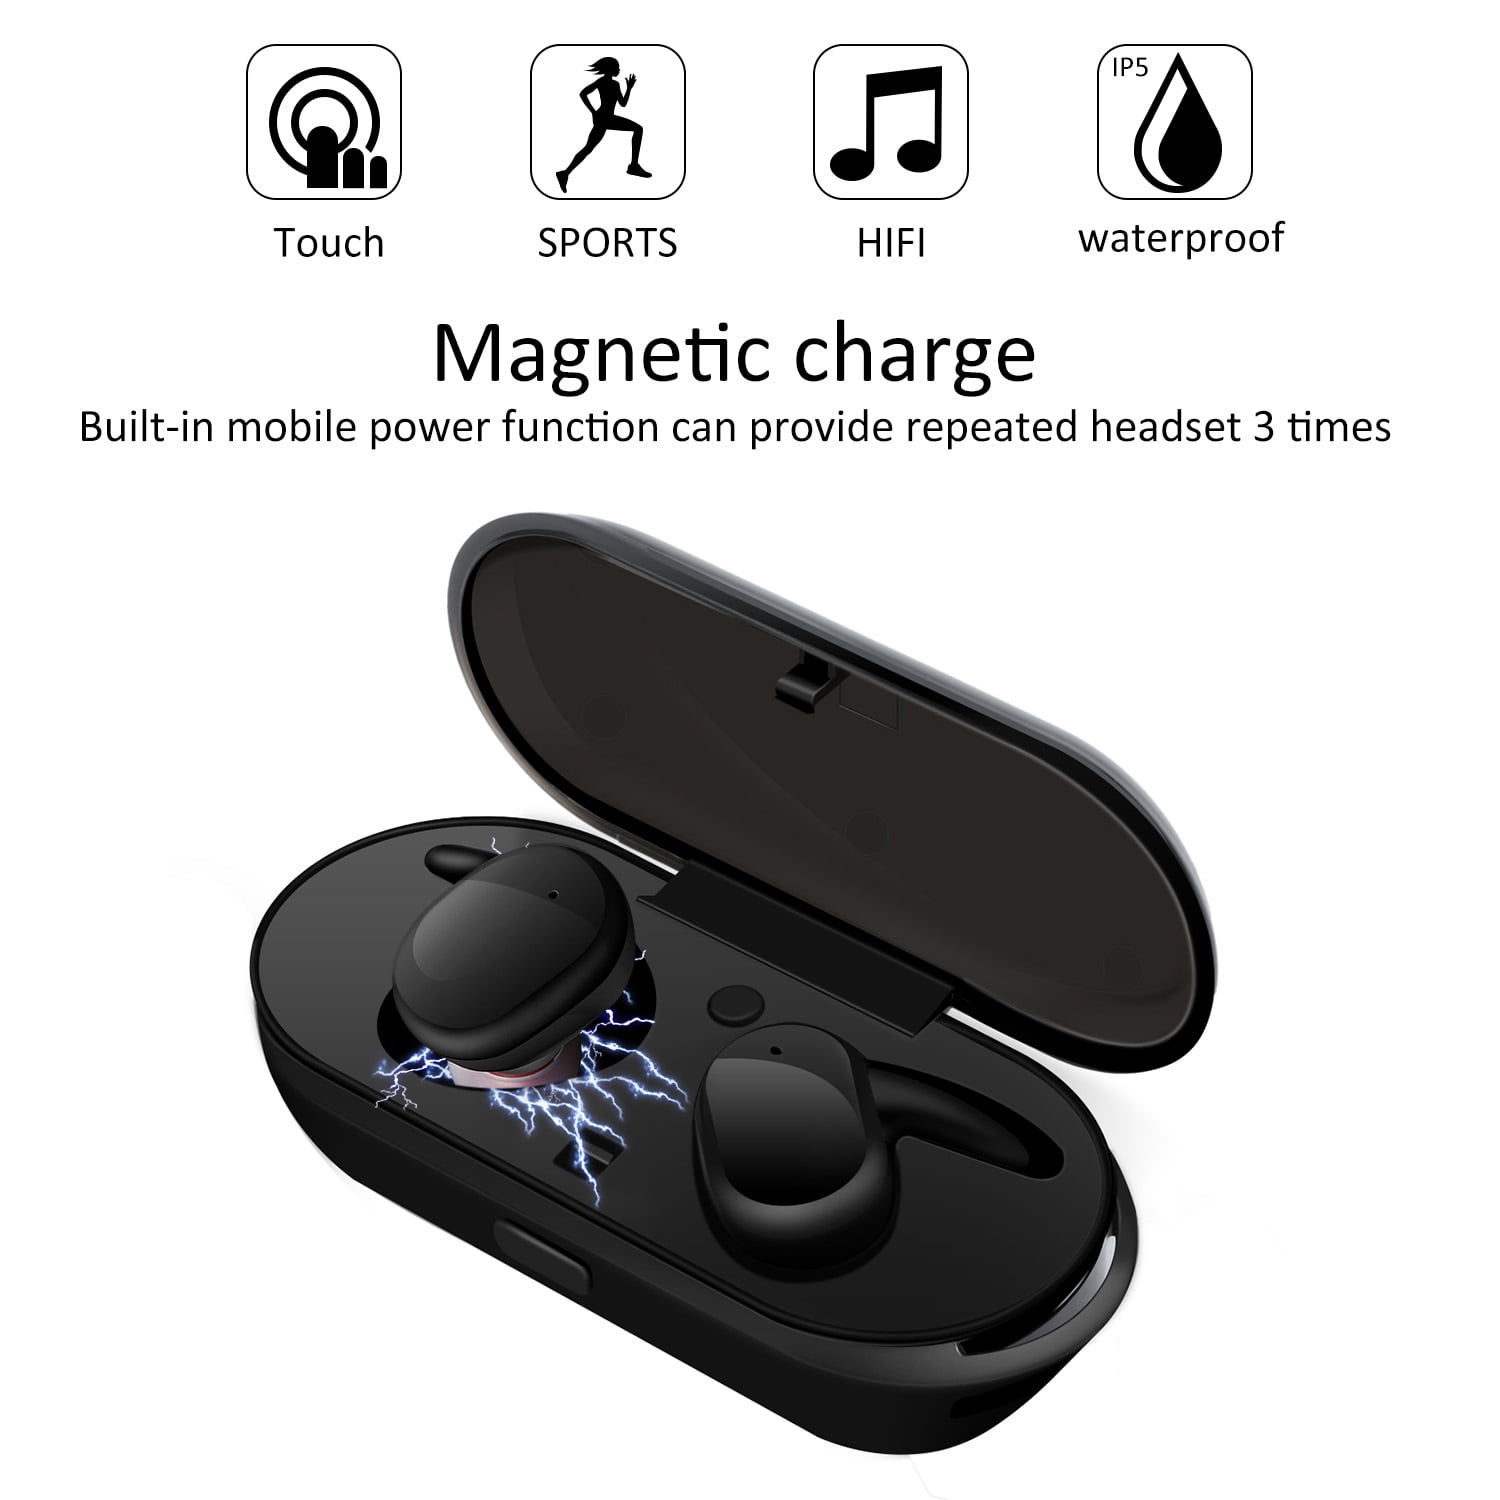 Wireless Earbuds, Mini TWS Headphones Touch Control Headset With Portable Wireless Charging Station/12 Hours Game Time/Built-in Microphone